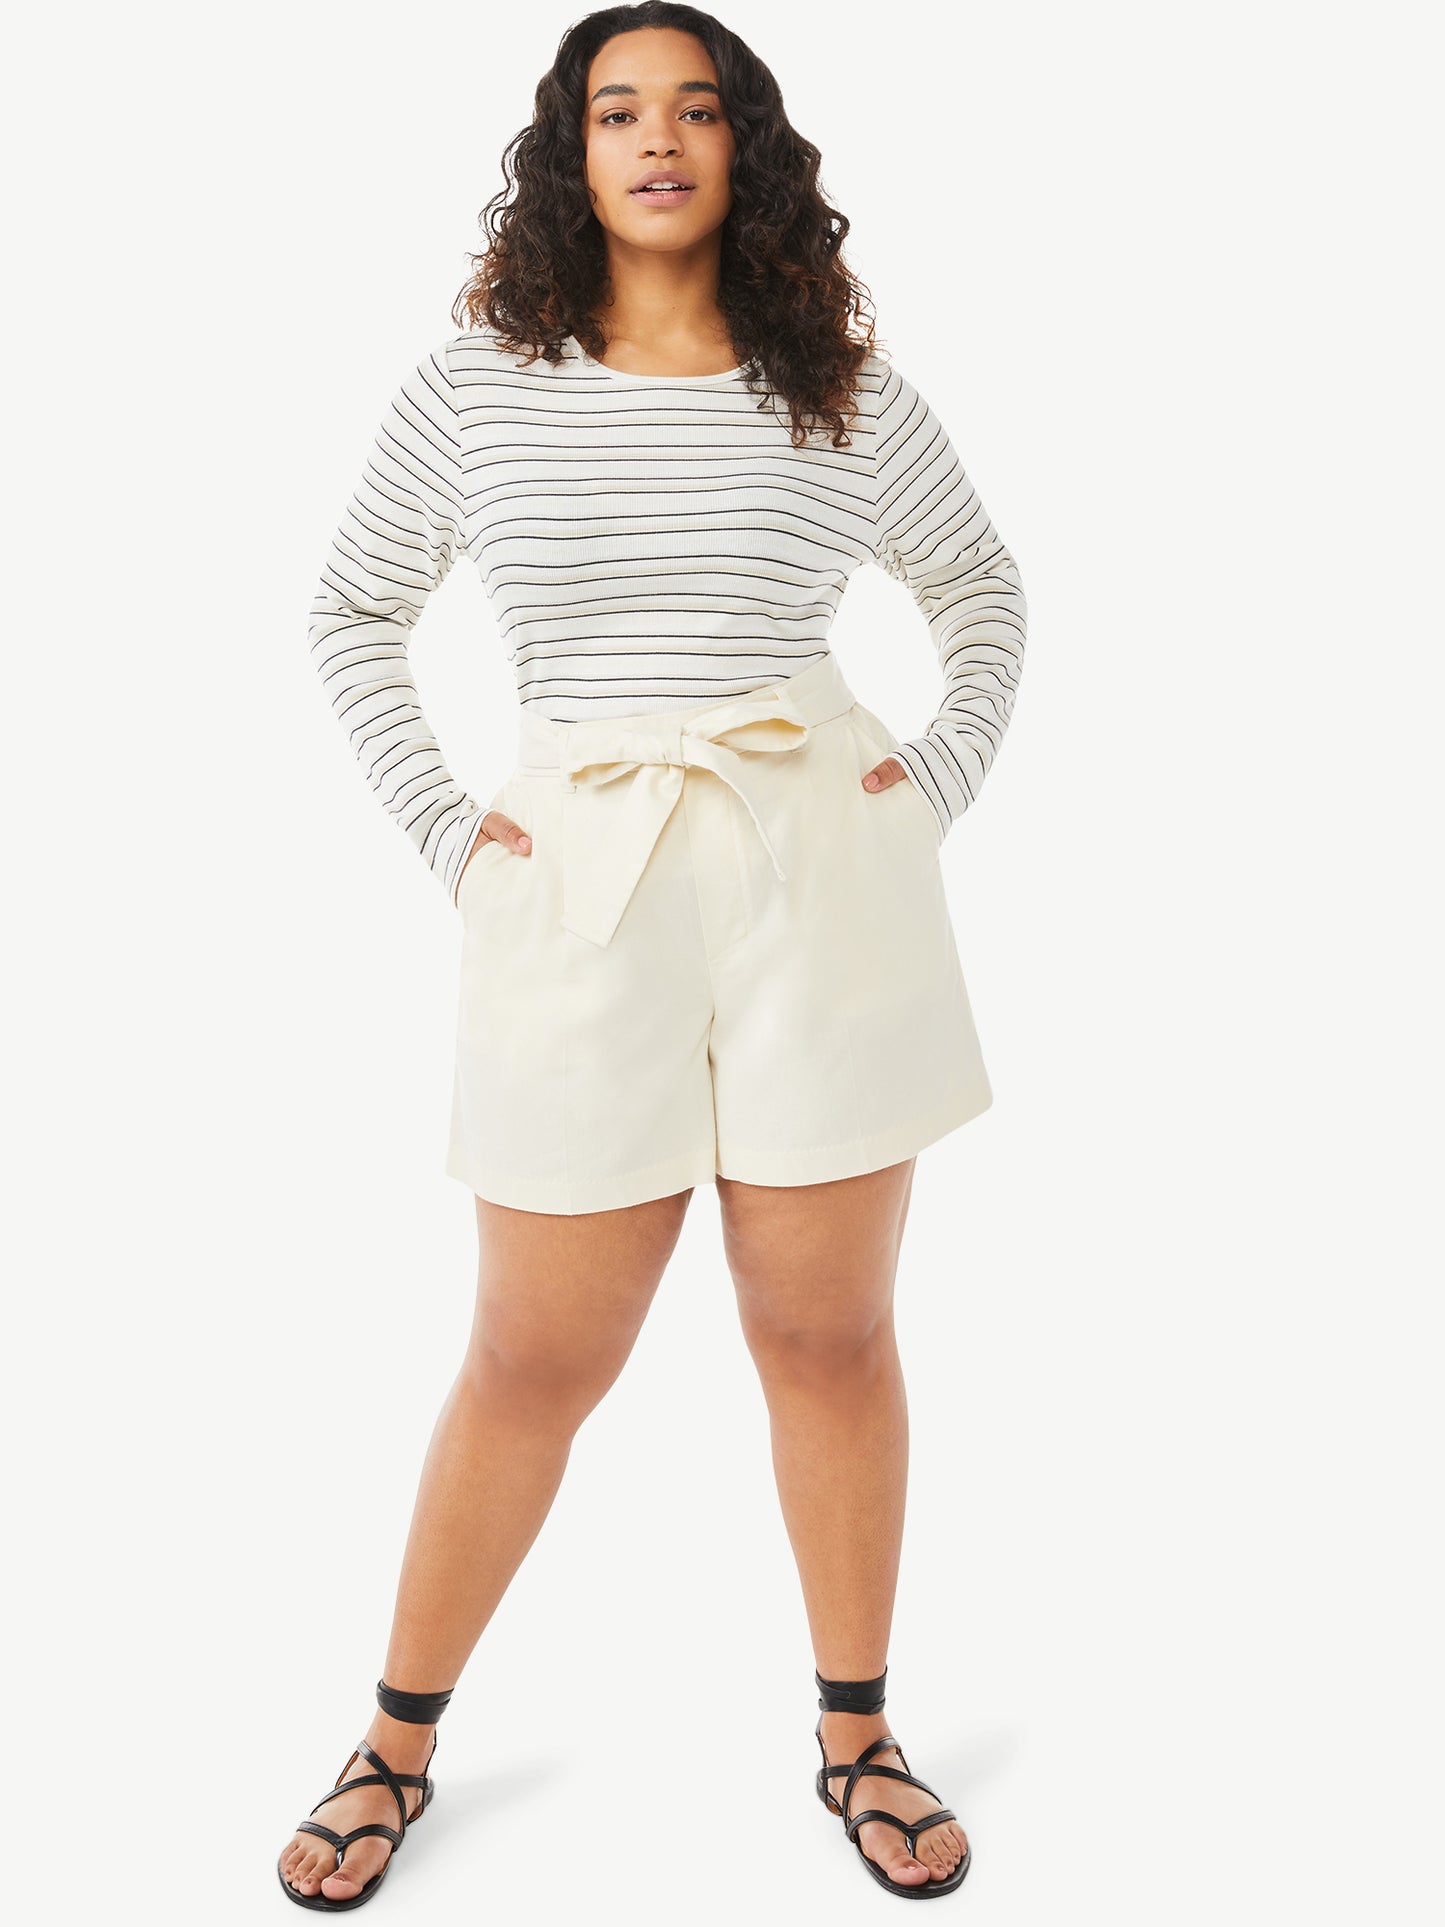 Free Assembly Womens Belted Pull-On Bermuda Shorts